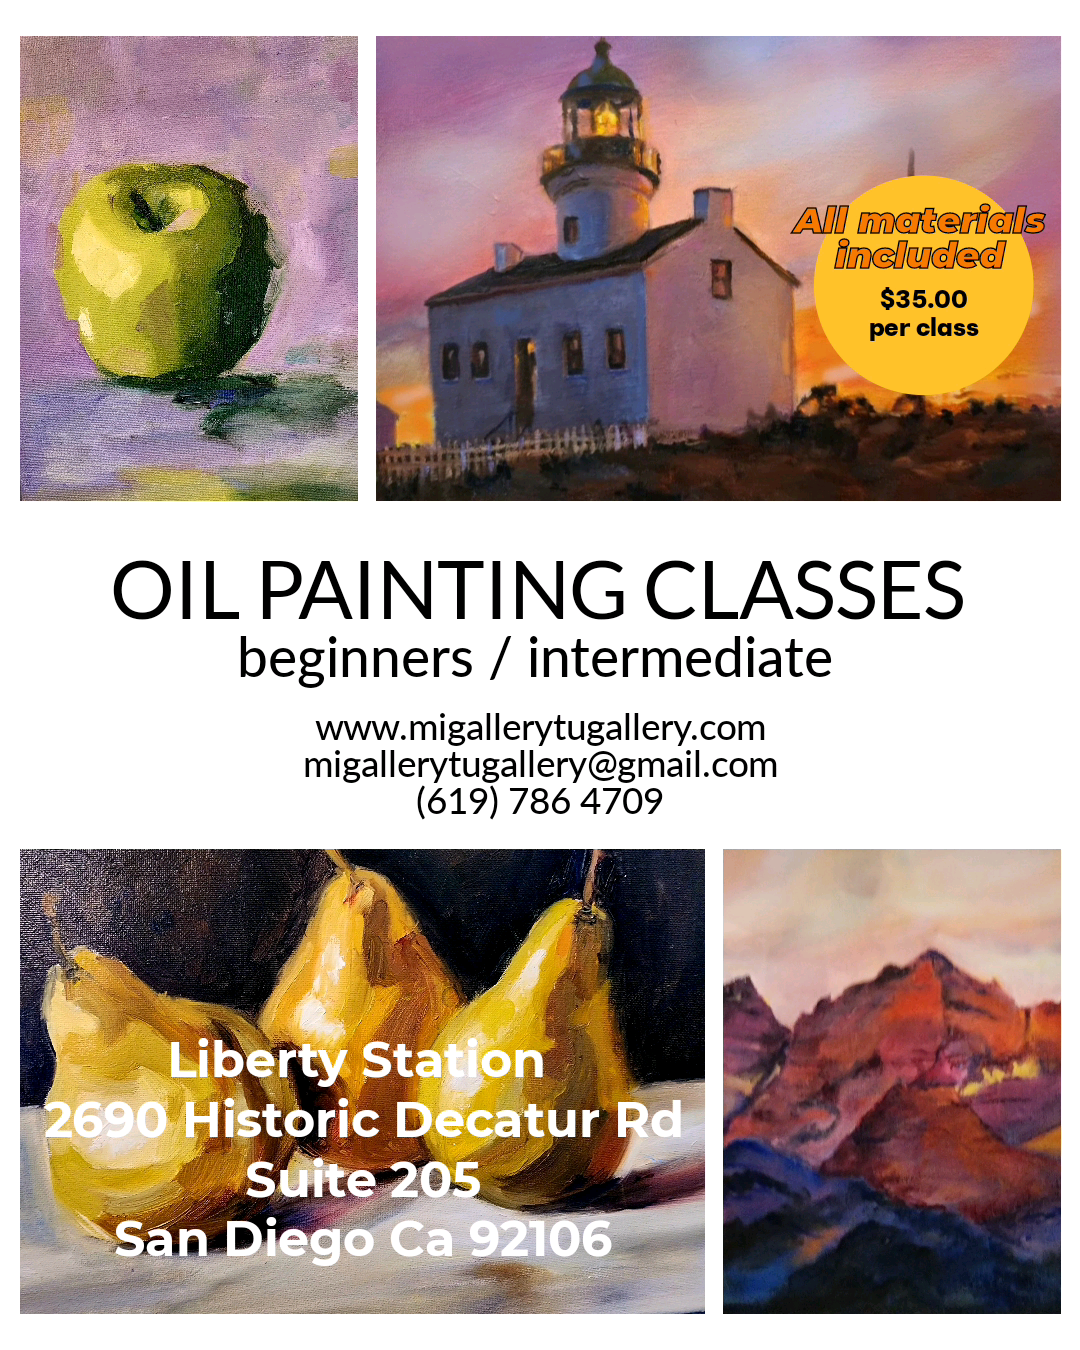 MONDAY OIL PAINTING CLASSES   (1:30PM TO 3:00PM)